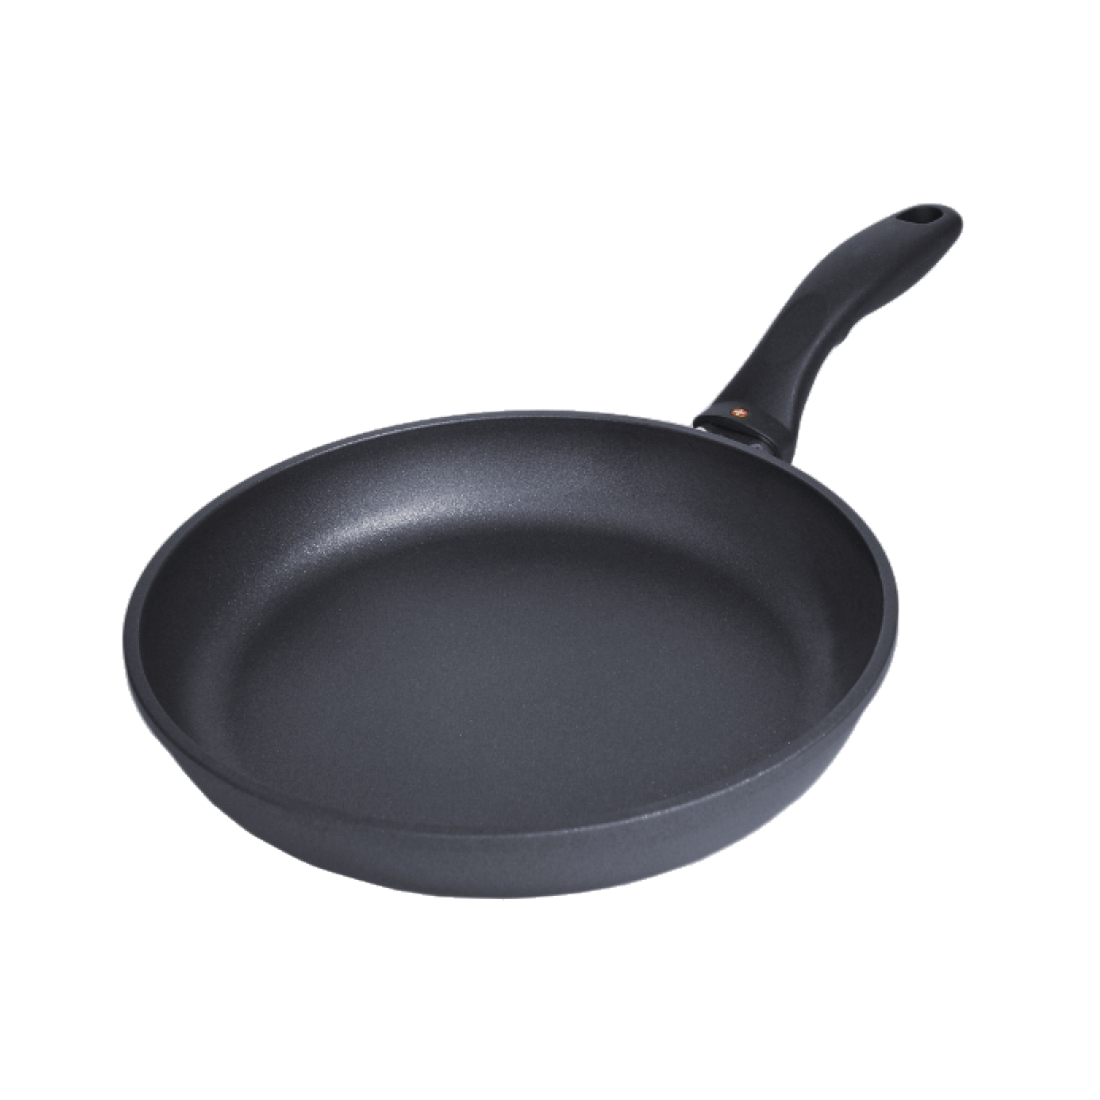 Frying Pan PNG HD and HQ Image pngteam.com